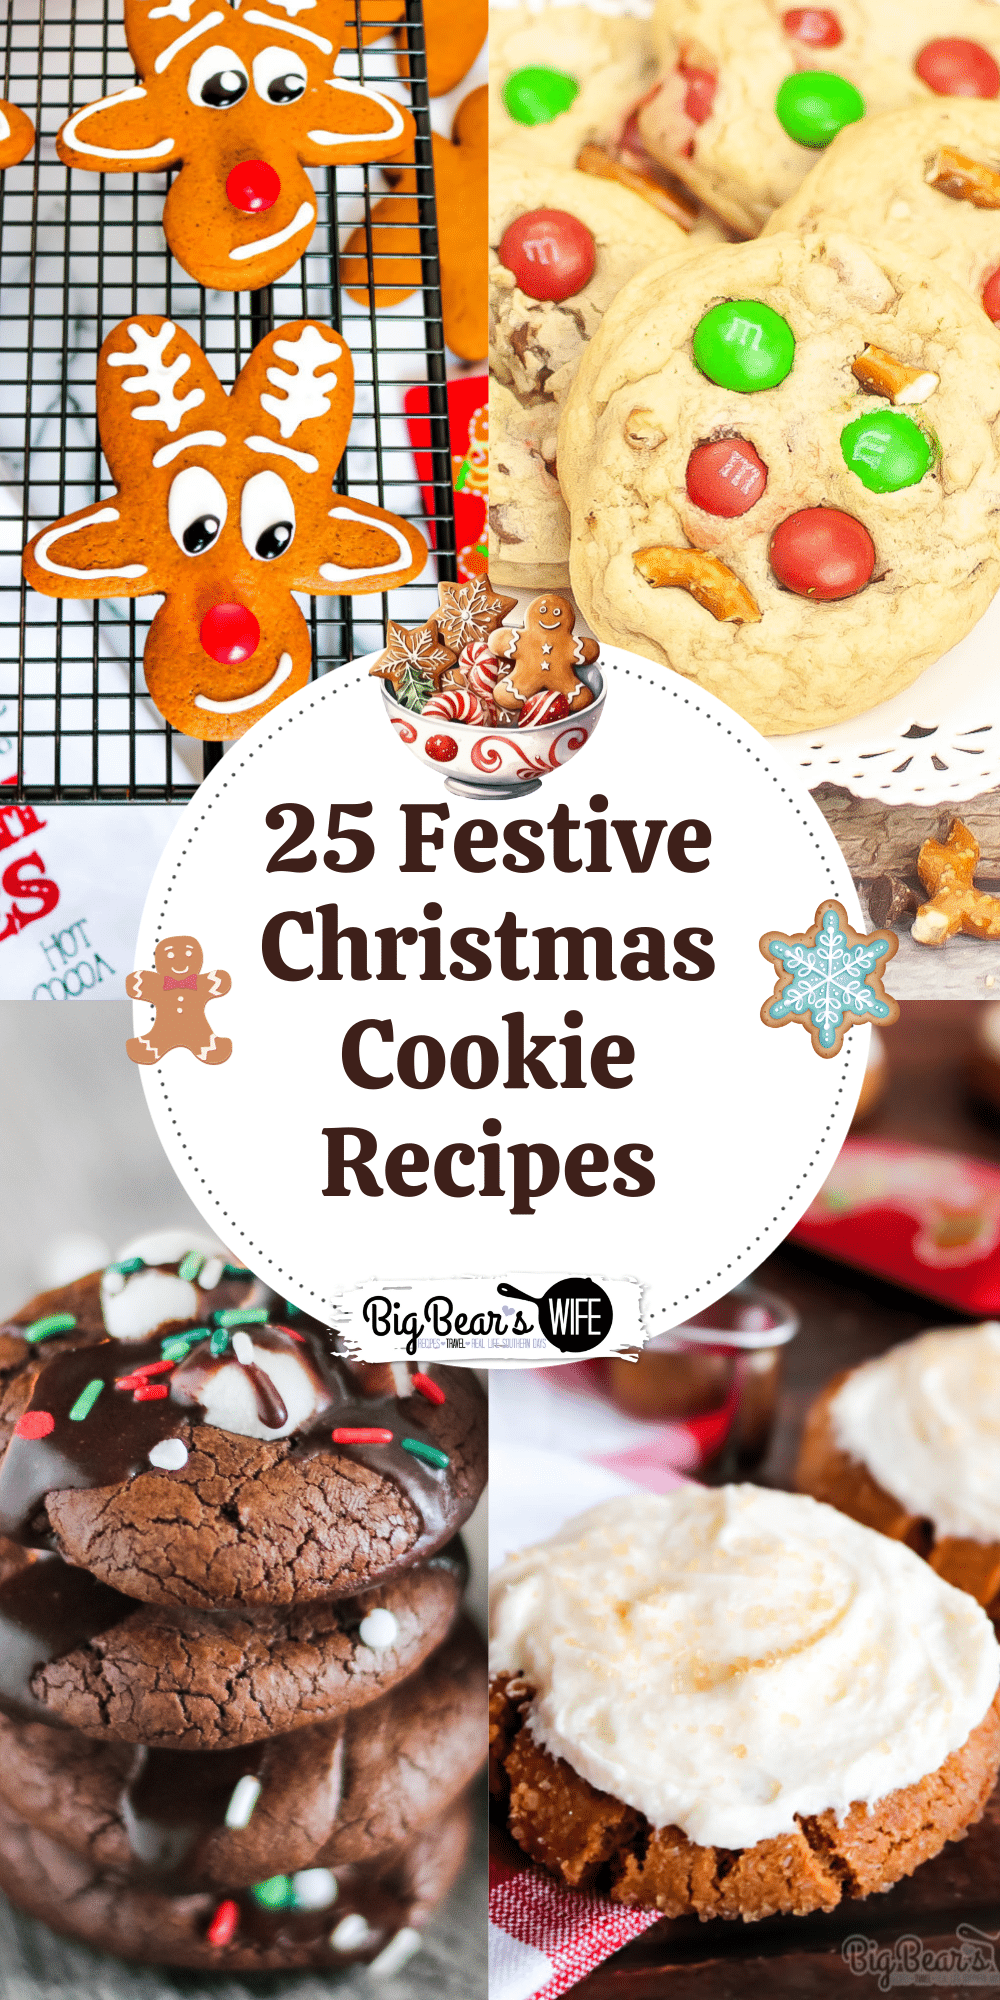 25 Festive Christmas Cookie Recipes – Get into the festive Holiday Spirit with 25 Festive Christmas Cookie Recipes perfect for dessert or gift-giving! via @bigbearswife